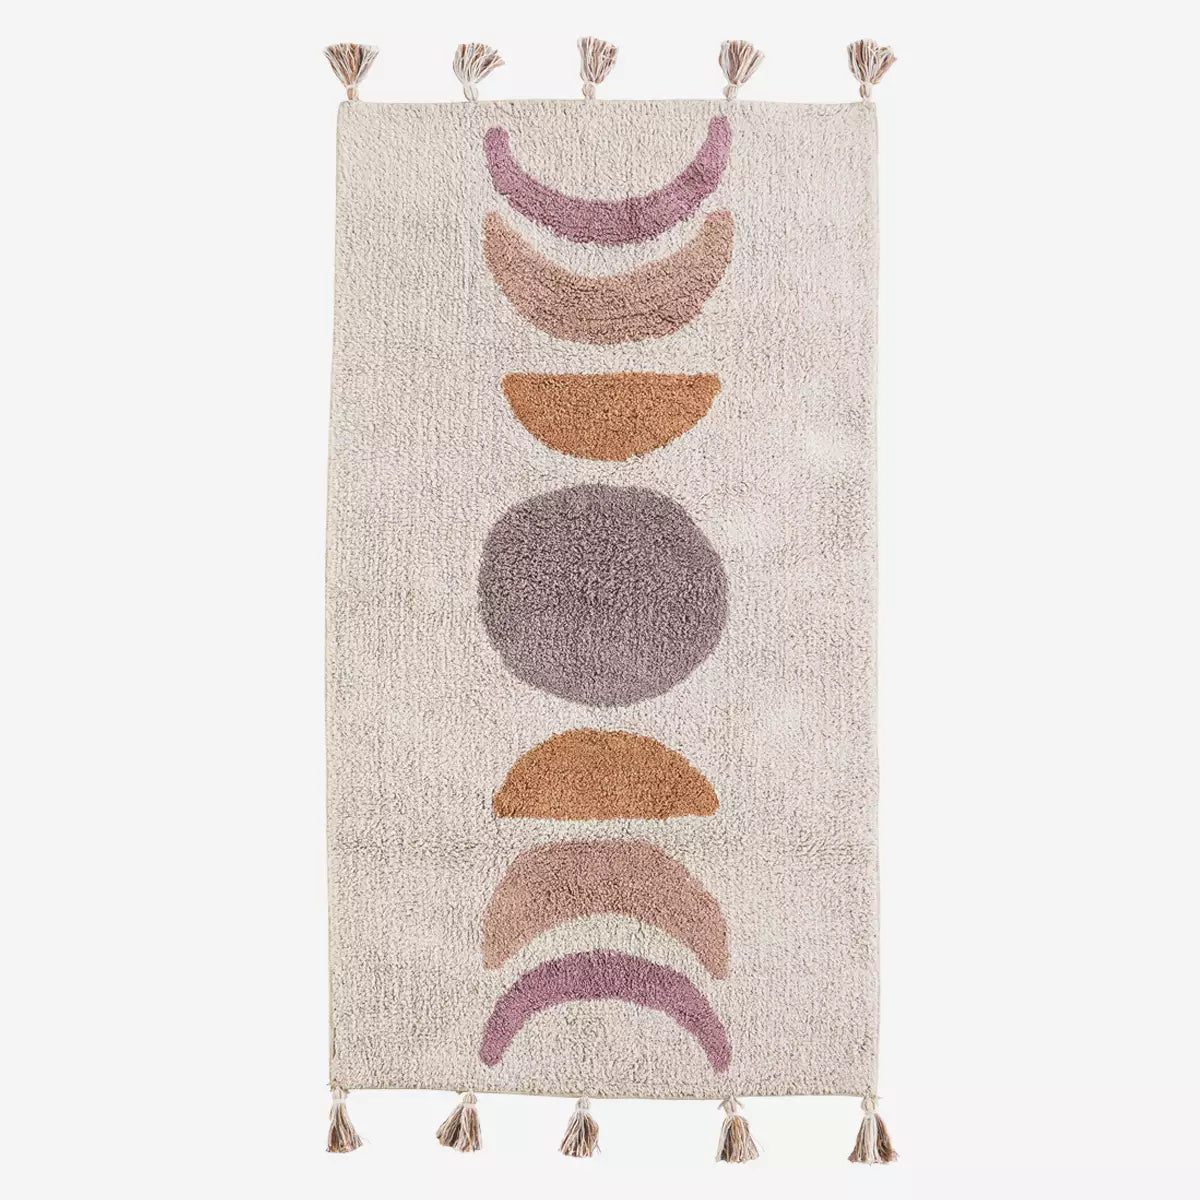 Tufted Cotton Runner With Tassels Lilac, Tan, Dusty Rose